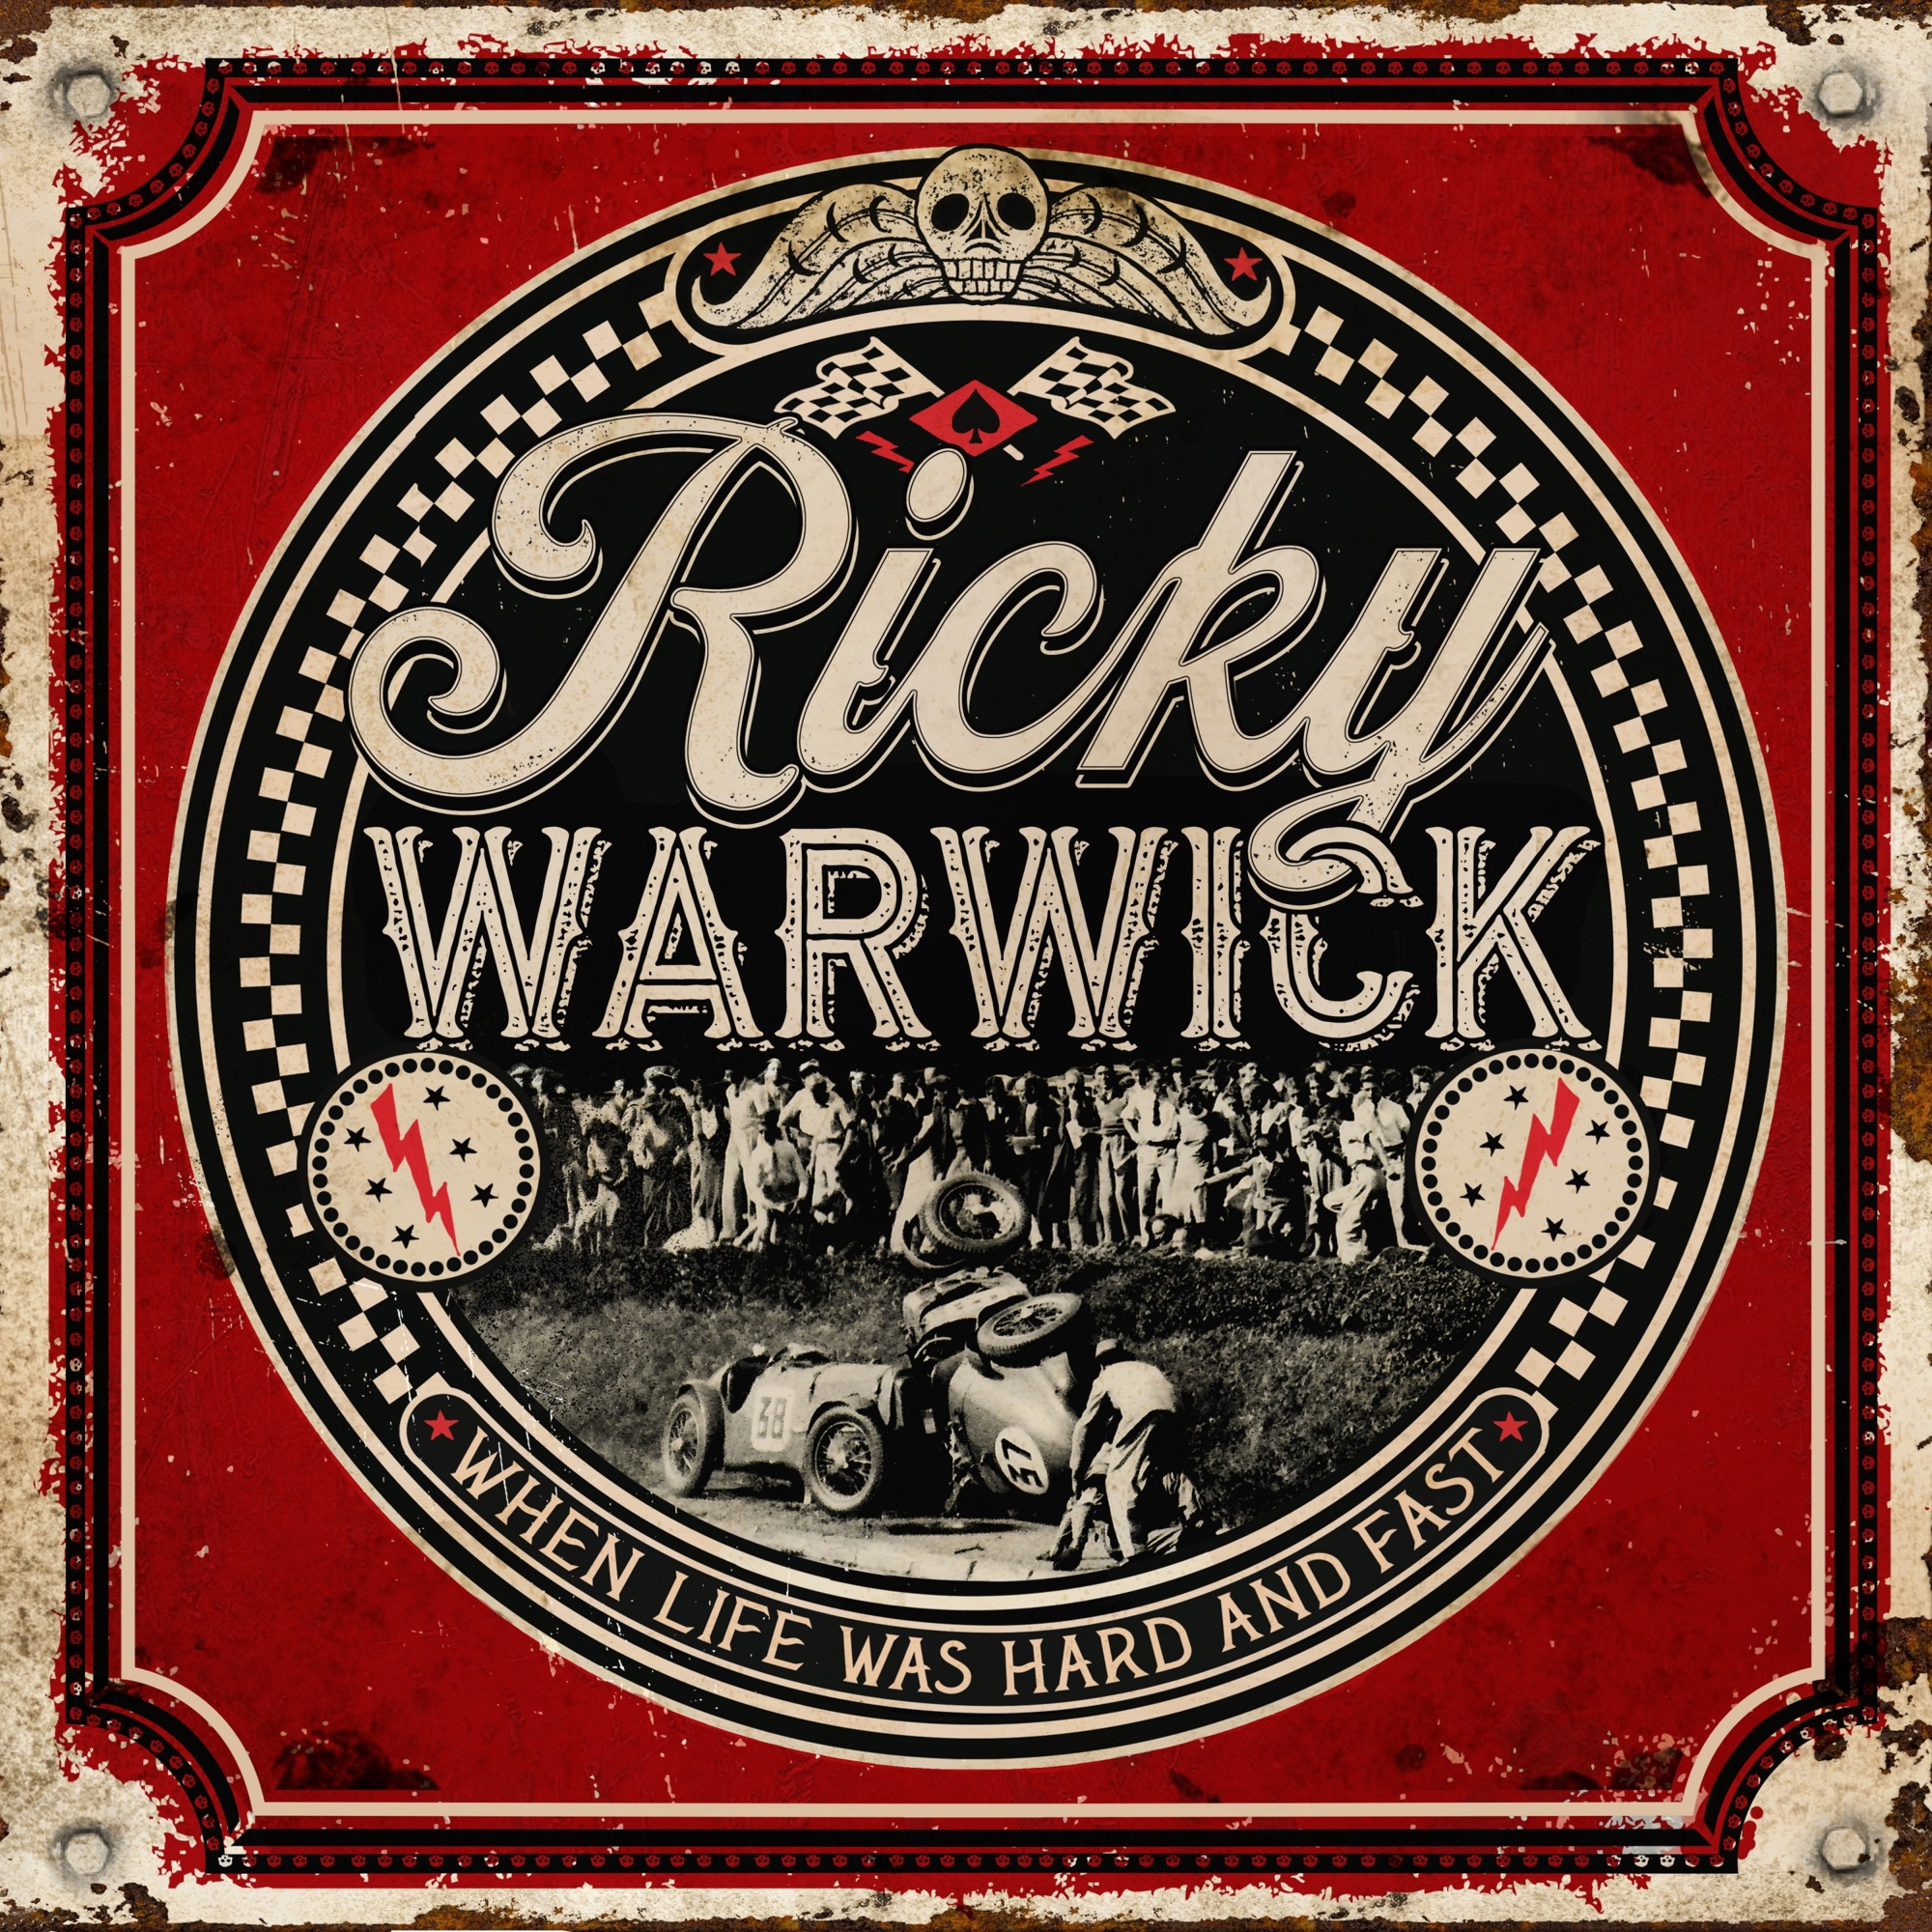 Art for When Life Was Hard & Fast by Ricky Warwick